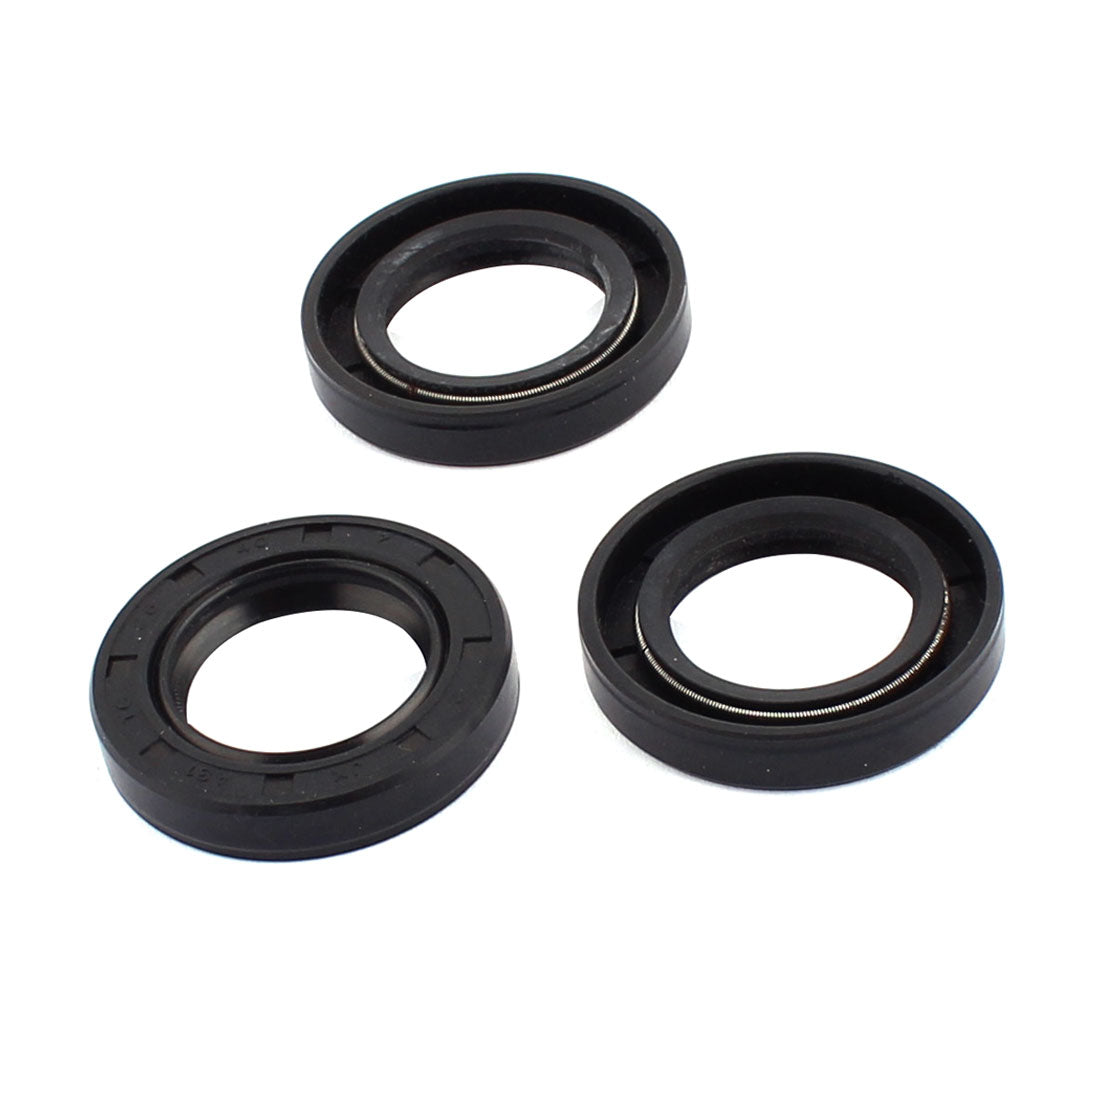 uxcell Uxcell Machine Rubber Oil Seal Sealing Ring Gasket Washer Black 40mm x 25mm x 7mm 3pcs